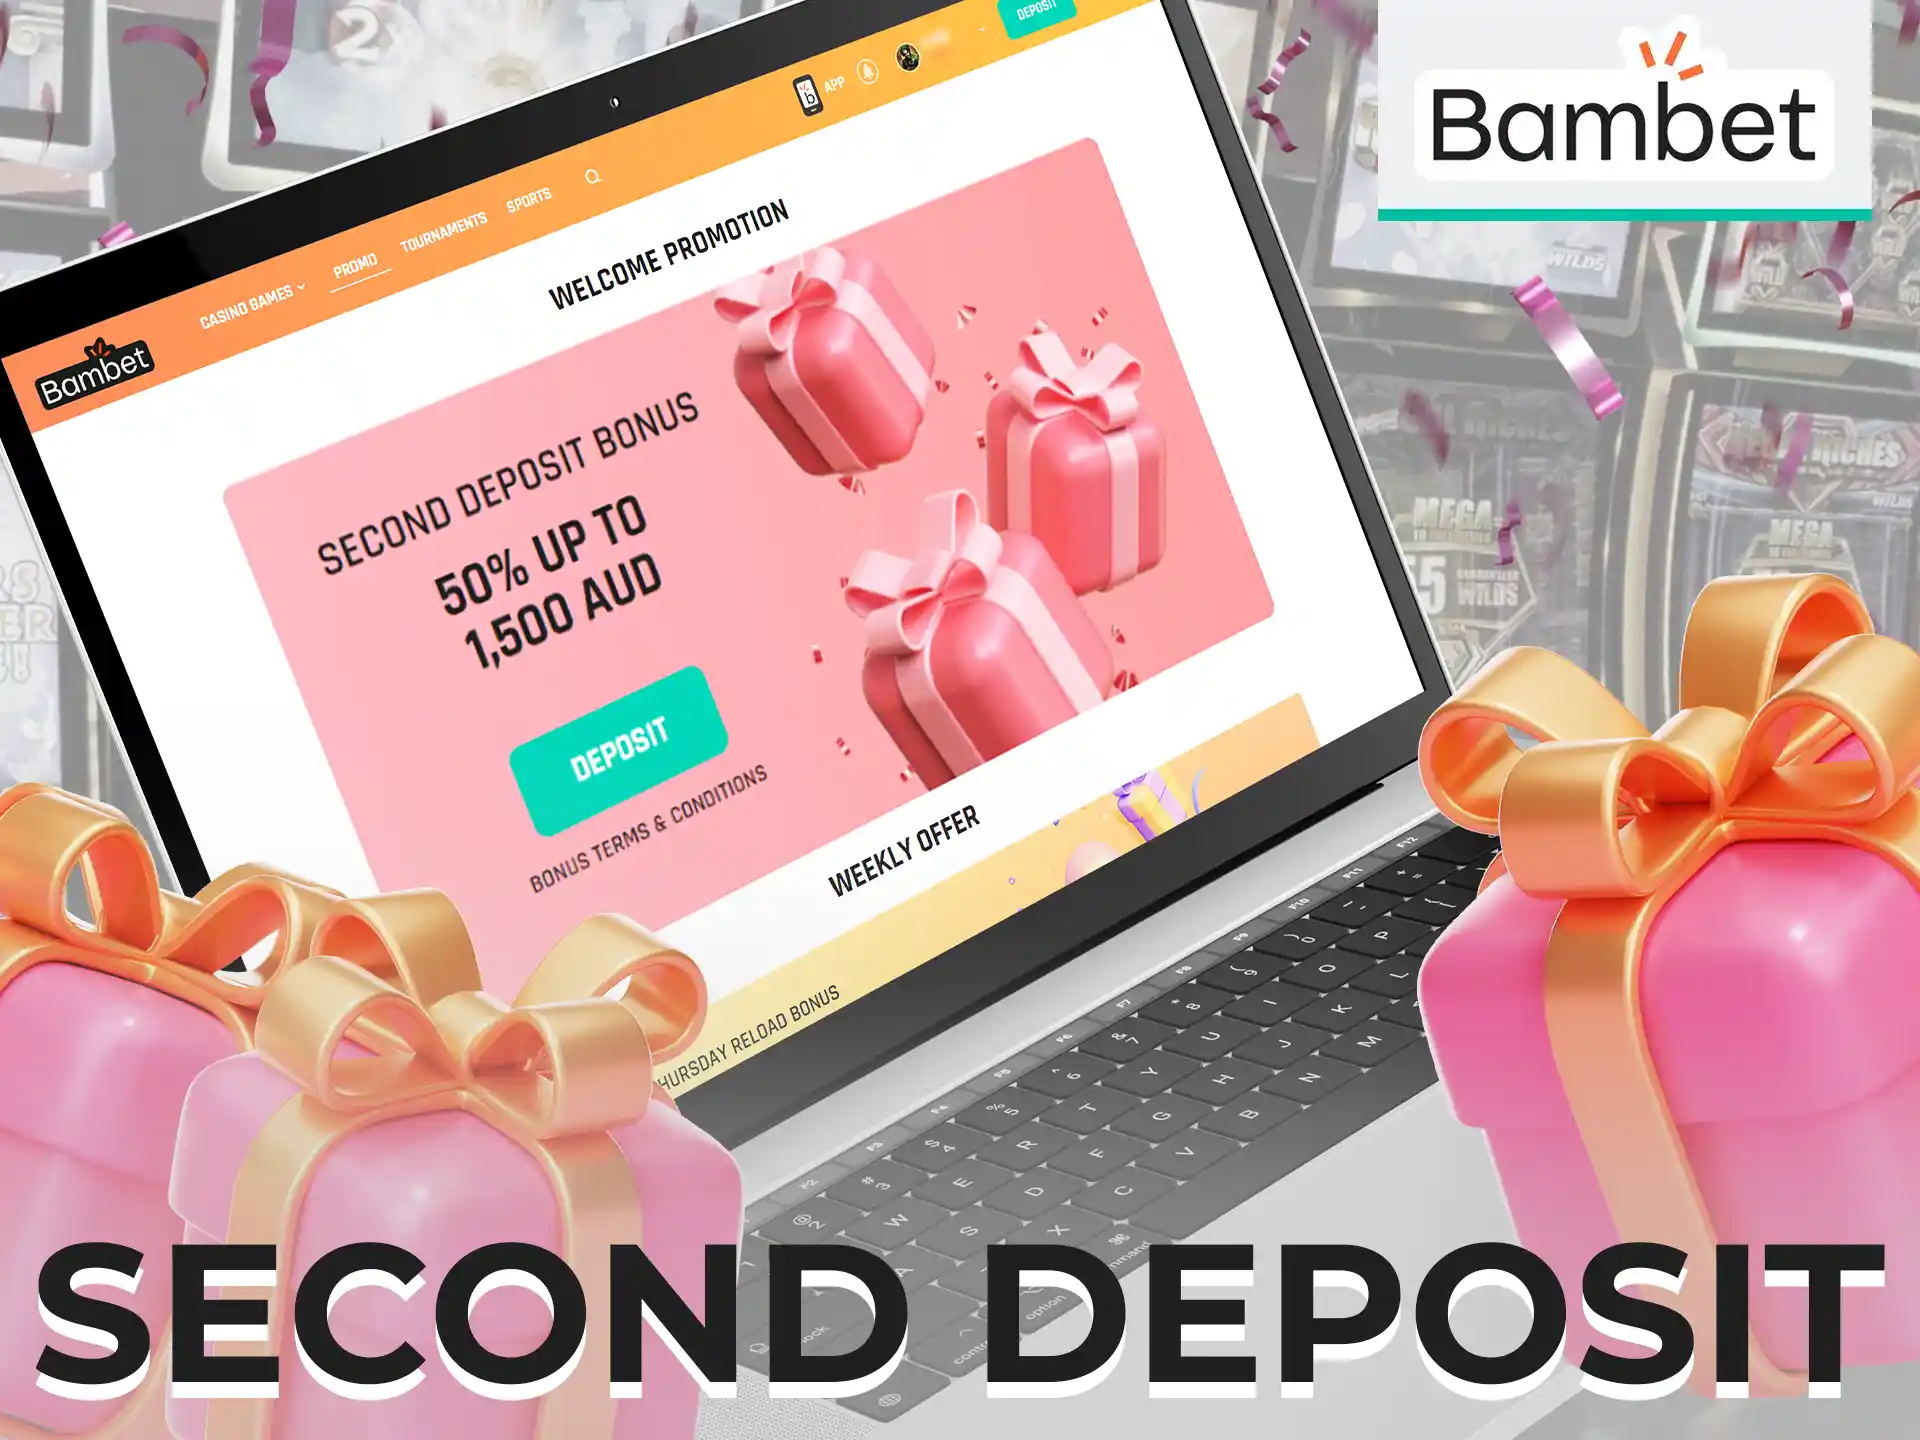 A 50% bonus up to AUD 1,500 awaits you on your second deposit.